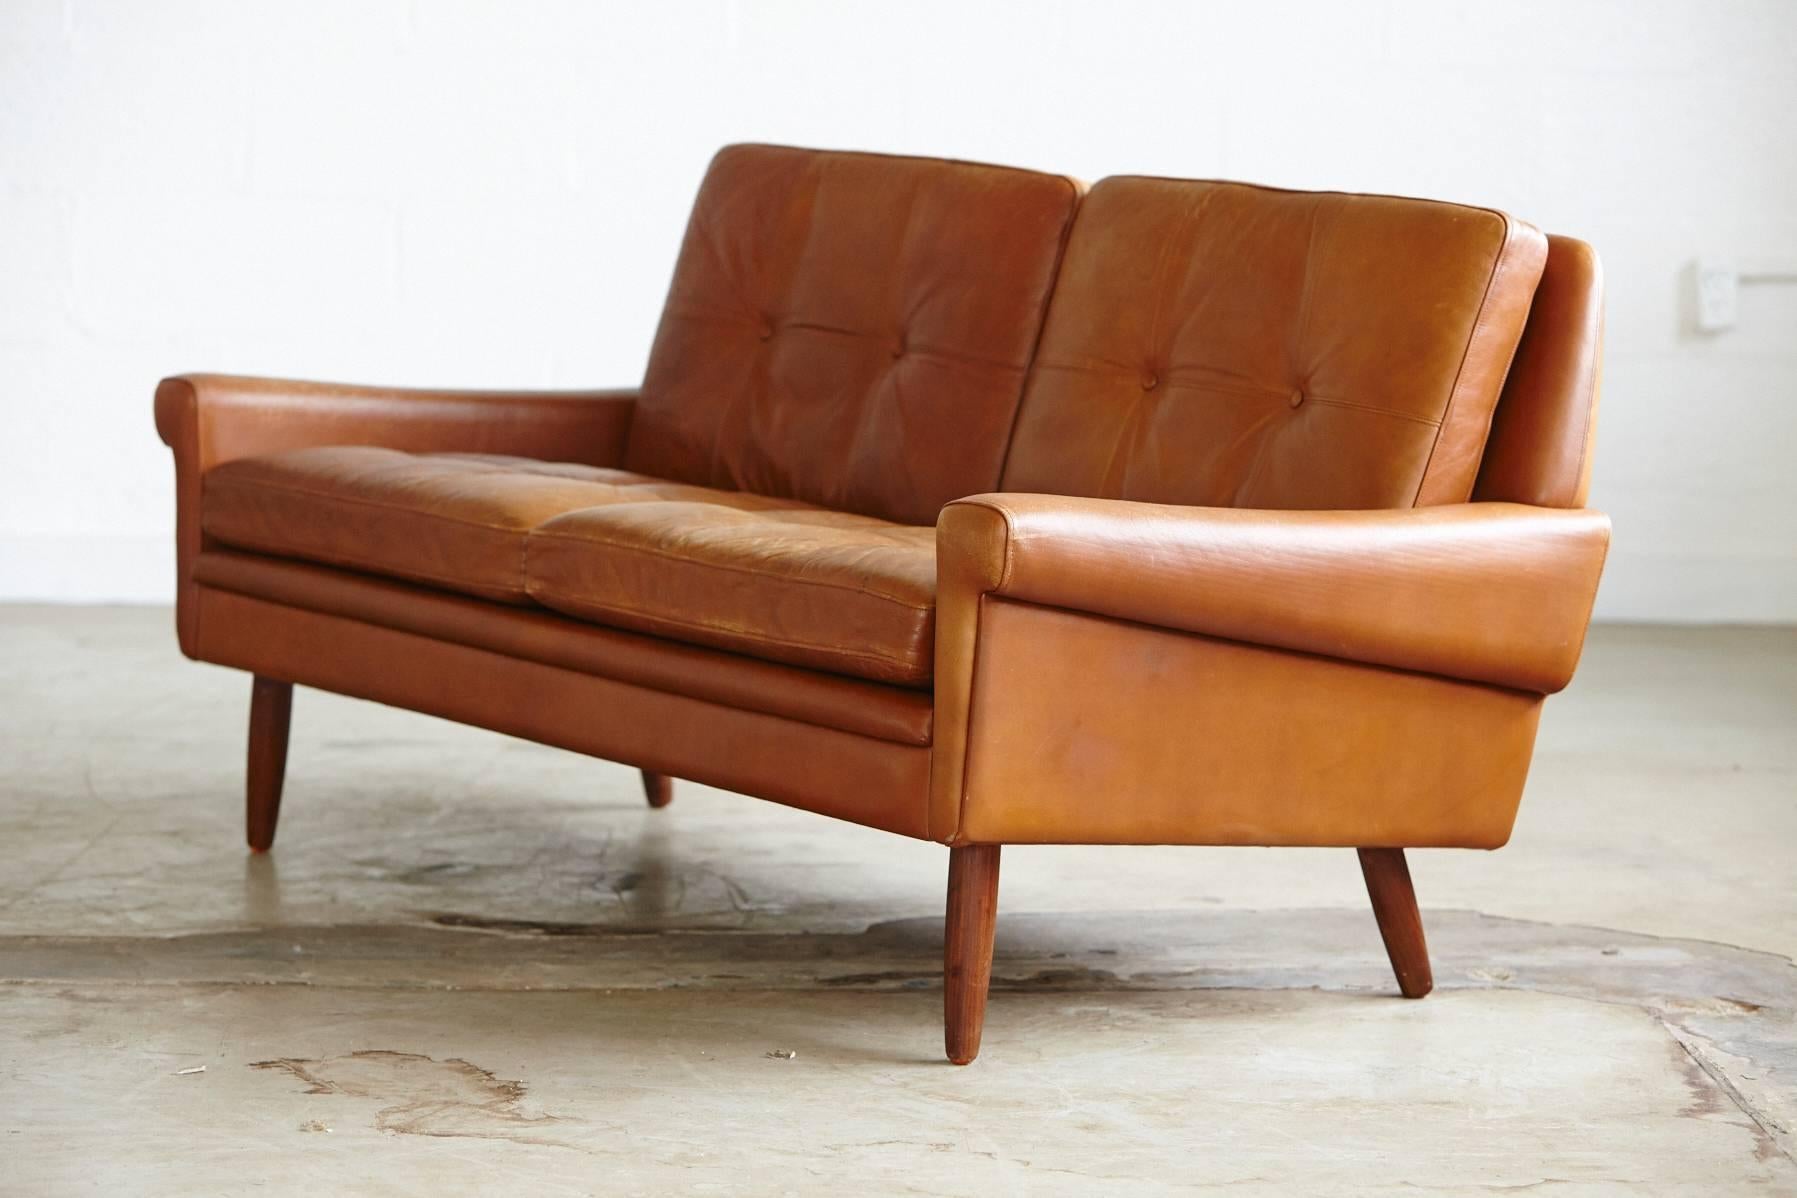 Stylish and charming tan leather sofa with great Mid-Century verve by acclaimed Danish designer, Svend Skipper. Beautiful lines, this sofa looks amazing from all angles including the back. High quality leather remaining soft and showing just the